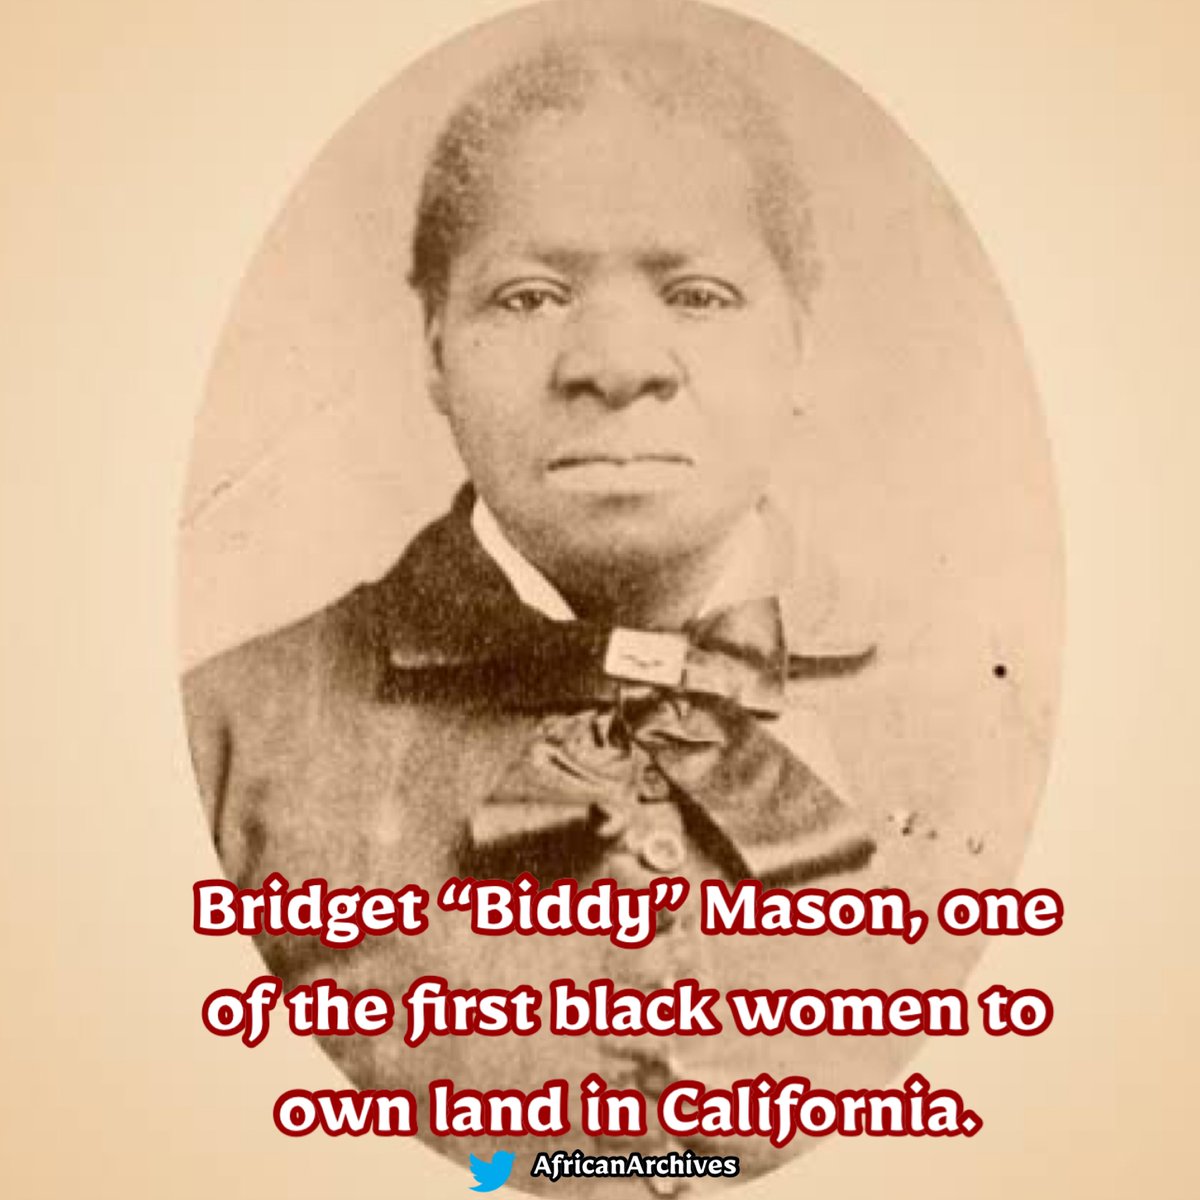 One of the most influential Black women in California, Bridget “Biddy” Mason, was one of the first black women to own land in California.  

She was born enslaved but sued for her freedom, used her midwifery skills to earn money that she invested in real estate & died one of the…